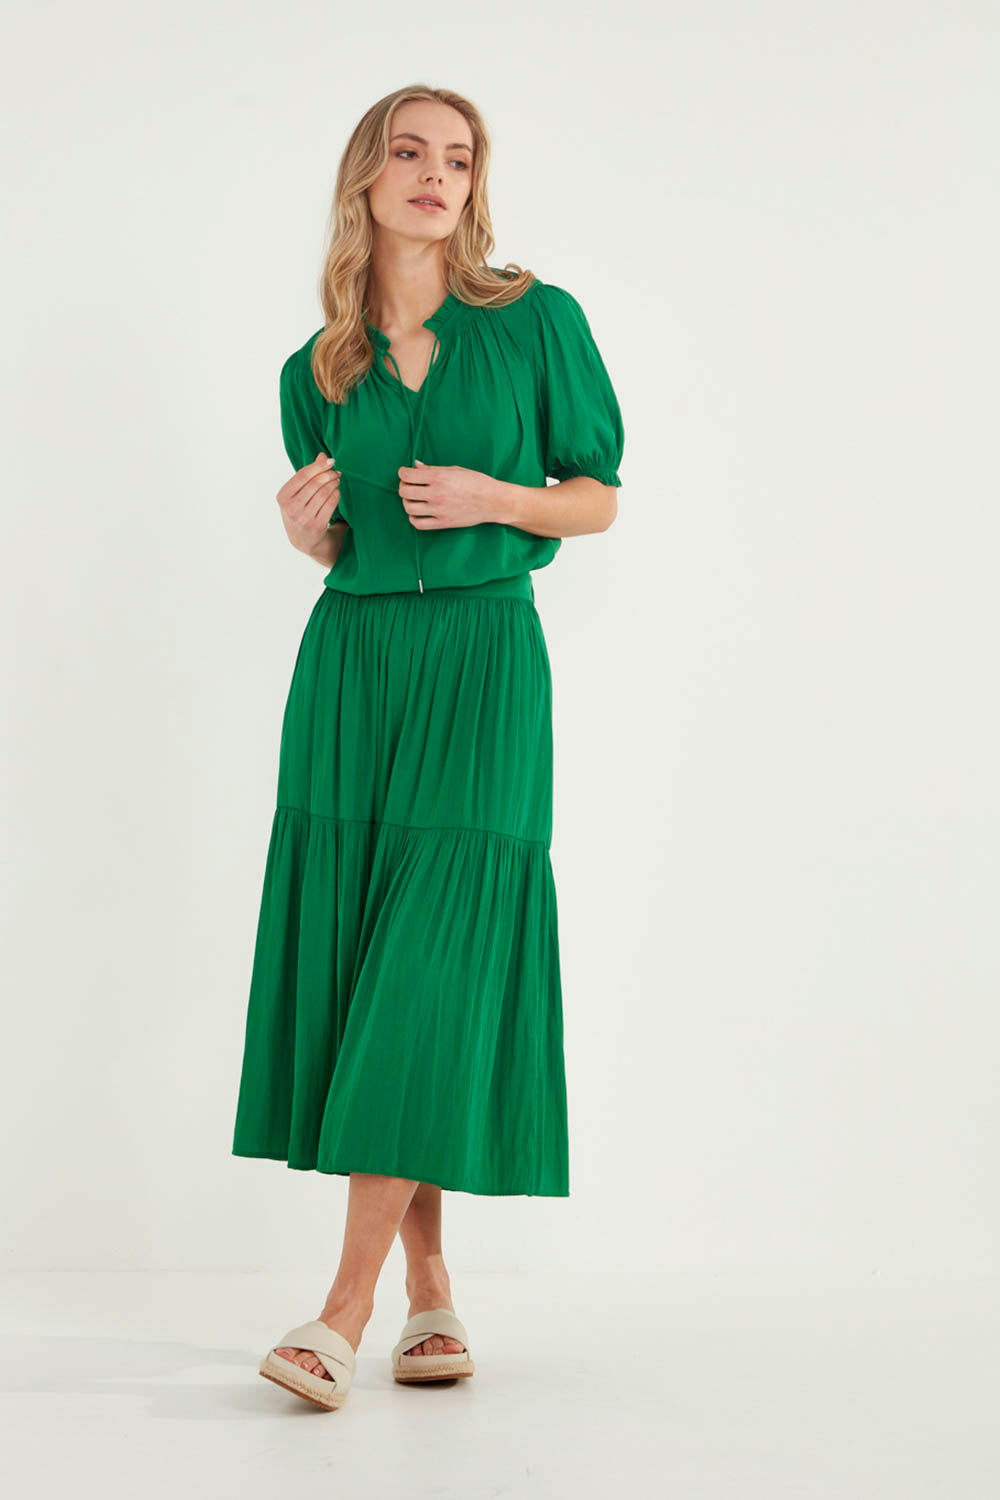 Glide by Verge - Reflection Top - Emerald - Top VERGE